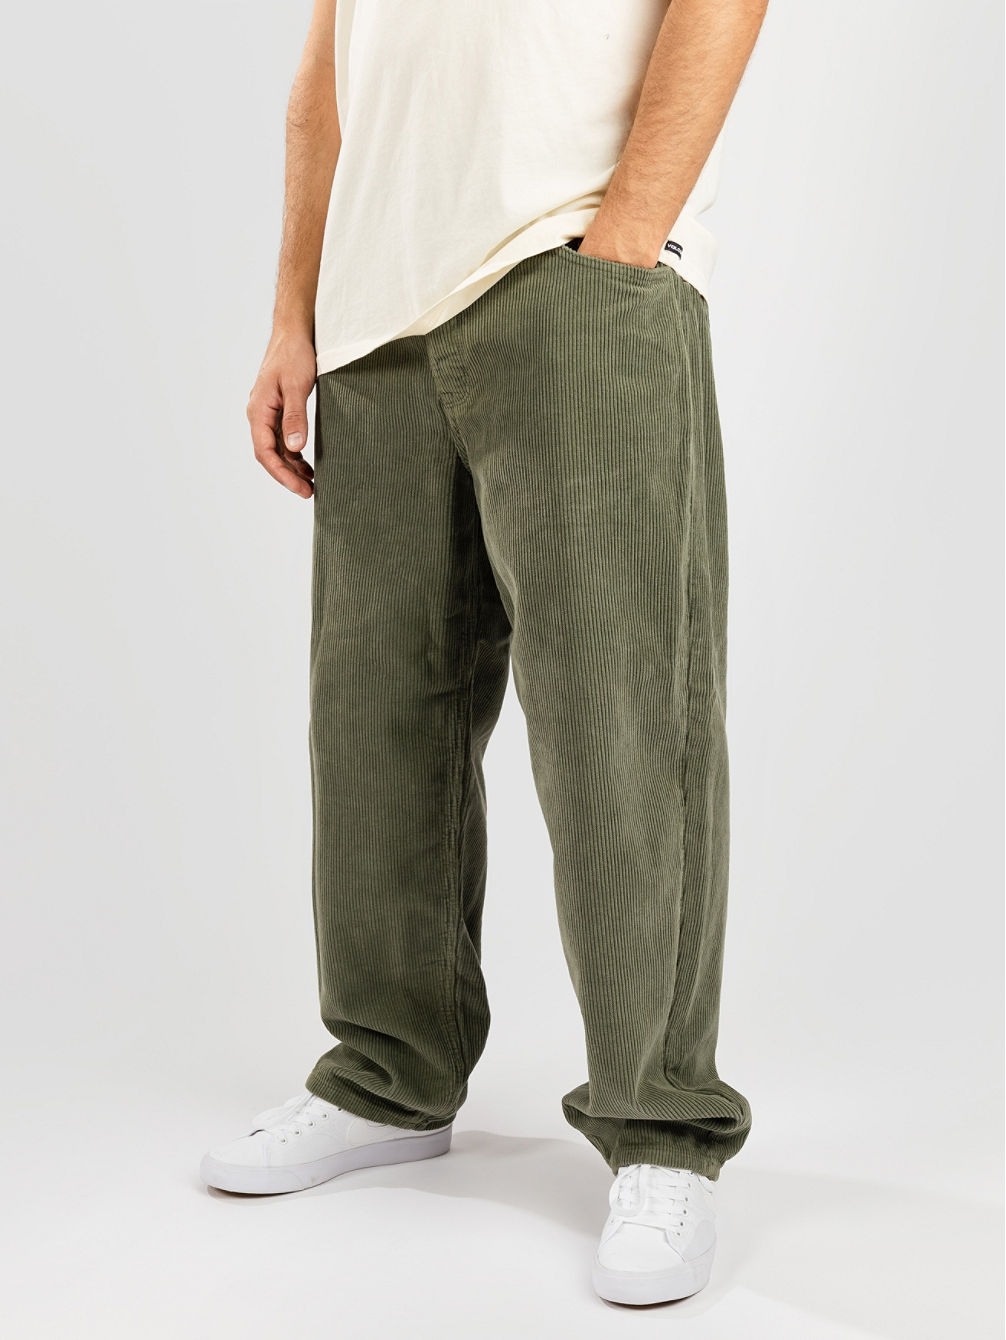 X-Tra MONSTER Cord Pants